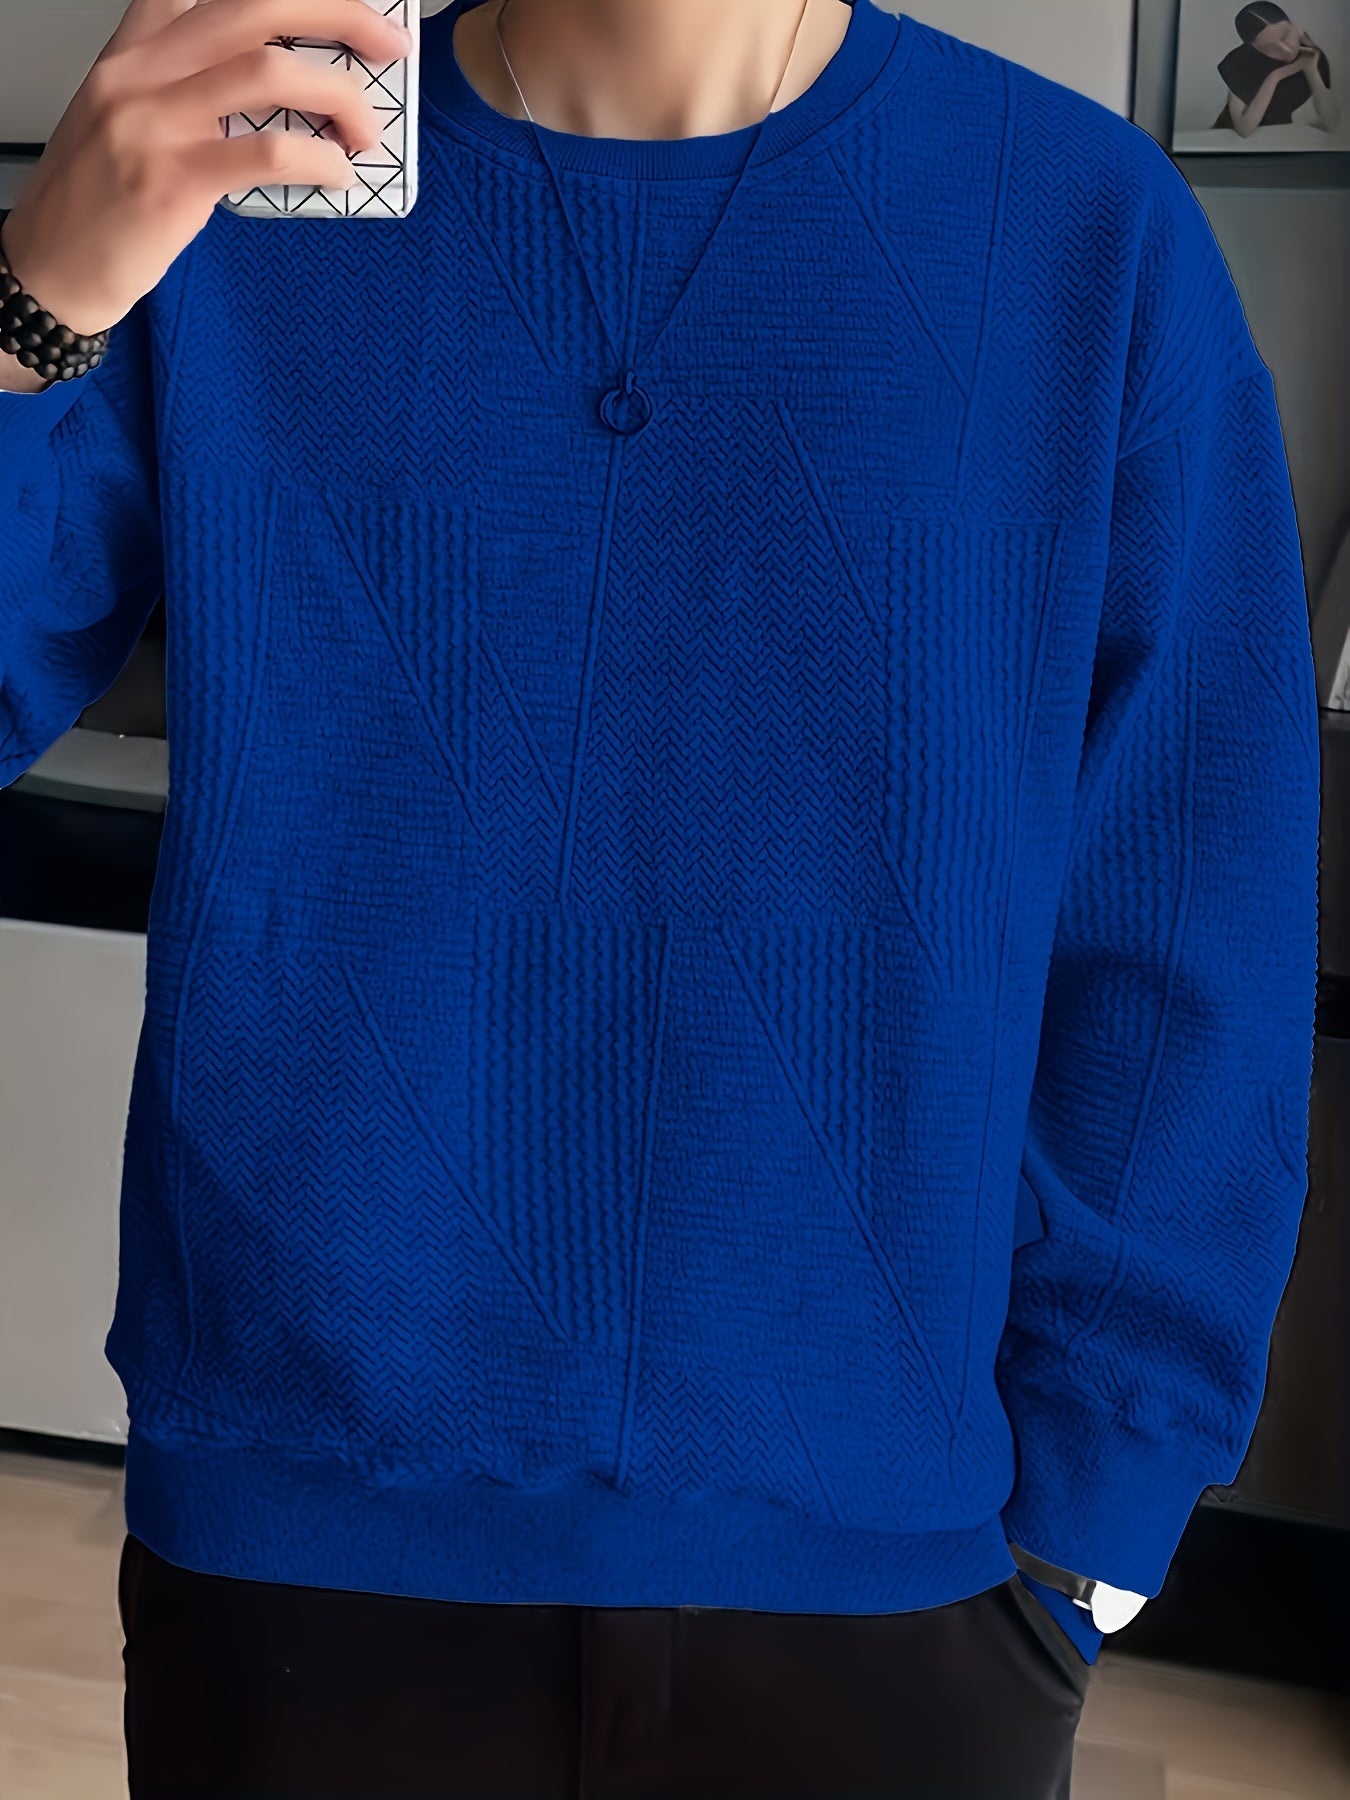 Men's Solid Pullover Sweatshirt - Perfect for Autumn, Winter, and Spring